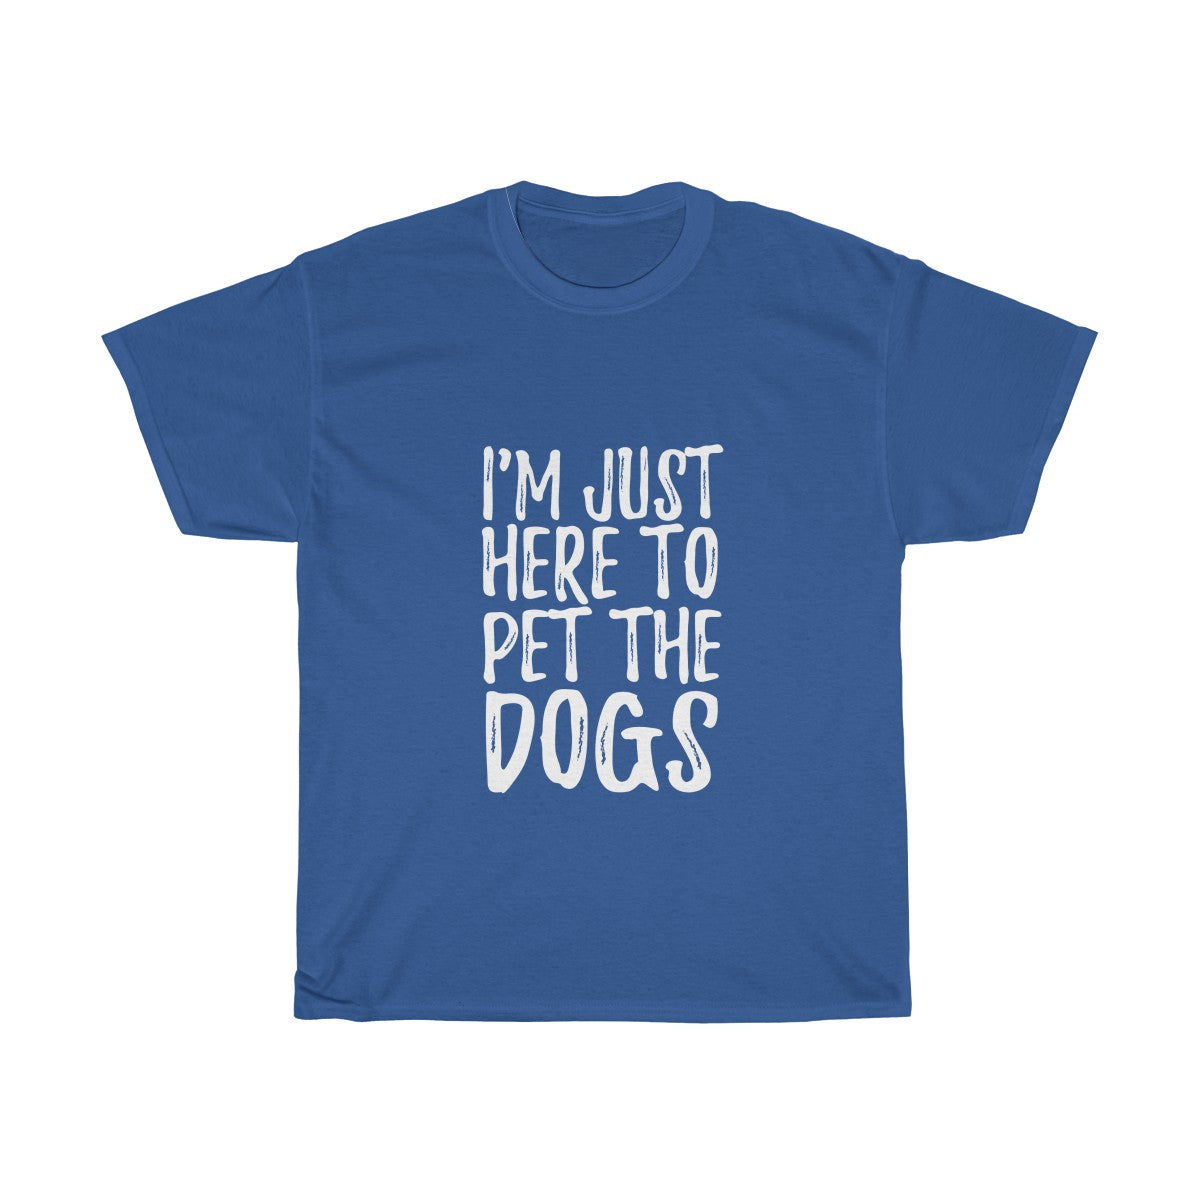 Here to Pet the Dogs Unisex Adult Tee - Alpha Dawg Designs